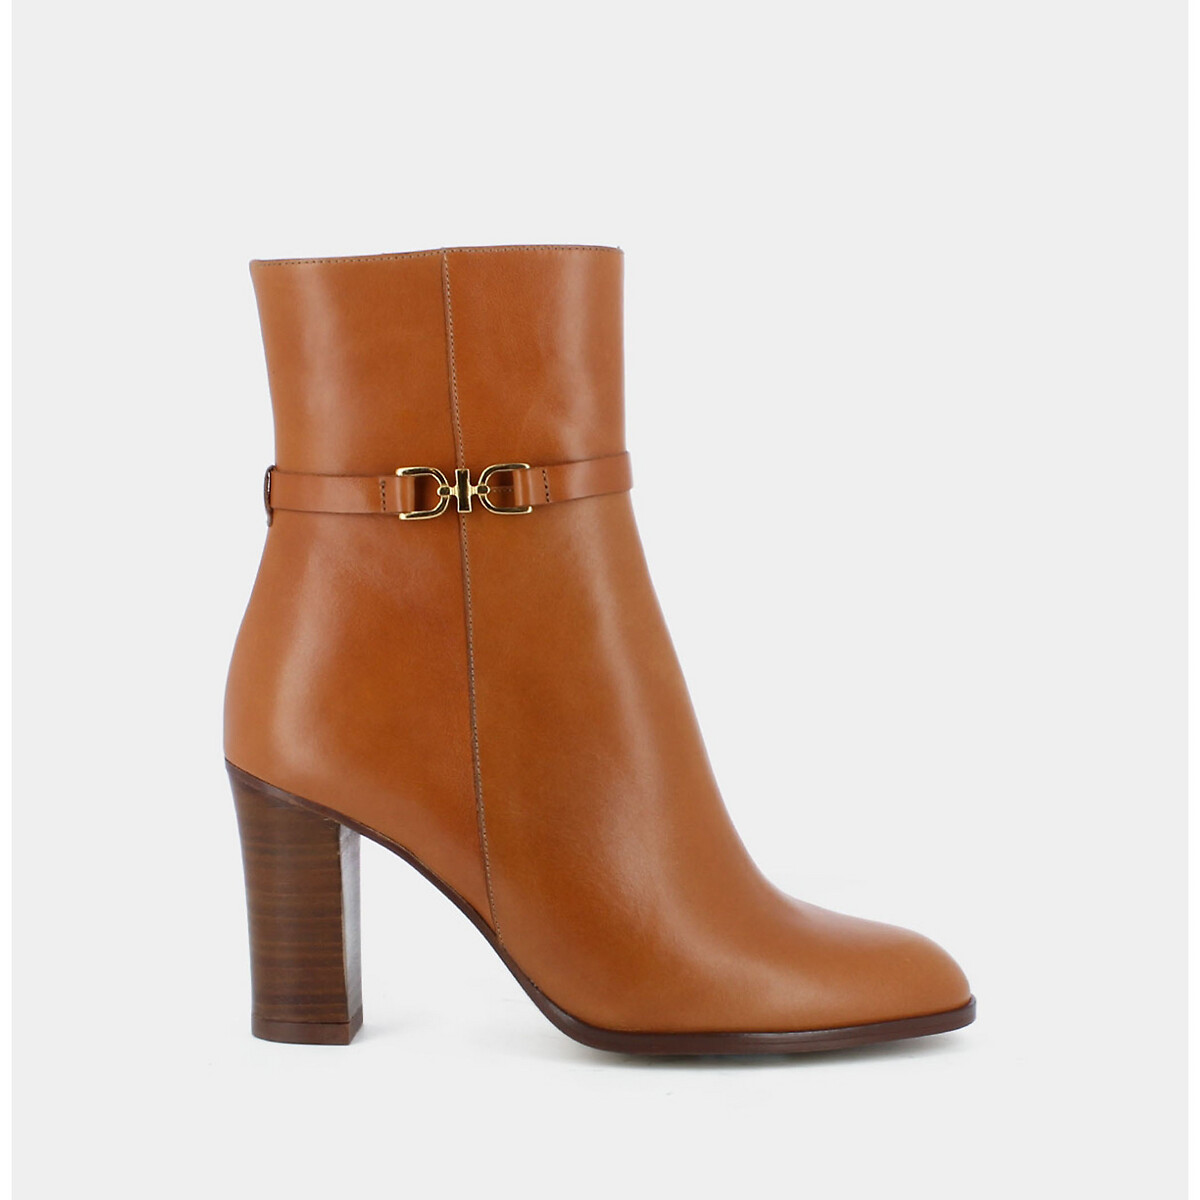 Dioniso leather heeled ankle boots, camel, Jonak | La Redoute